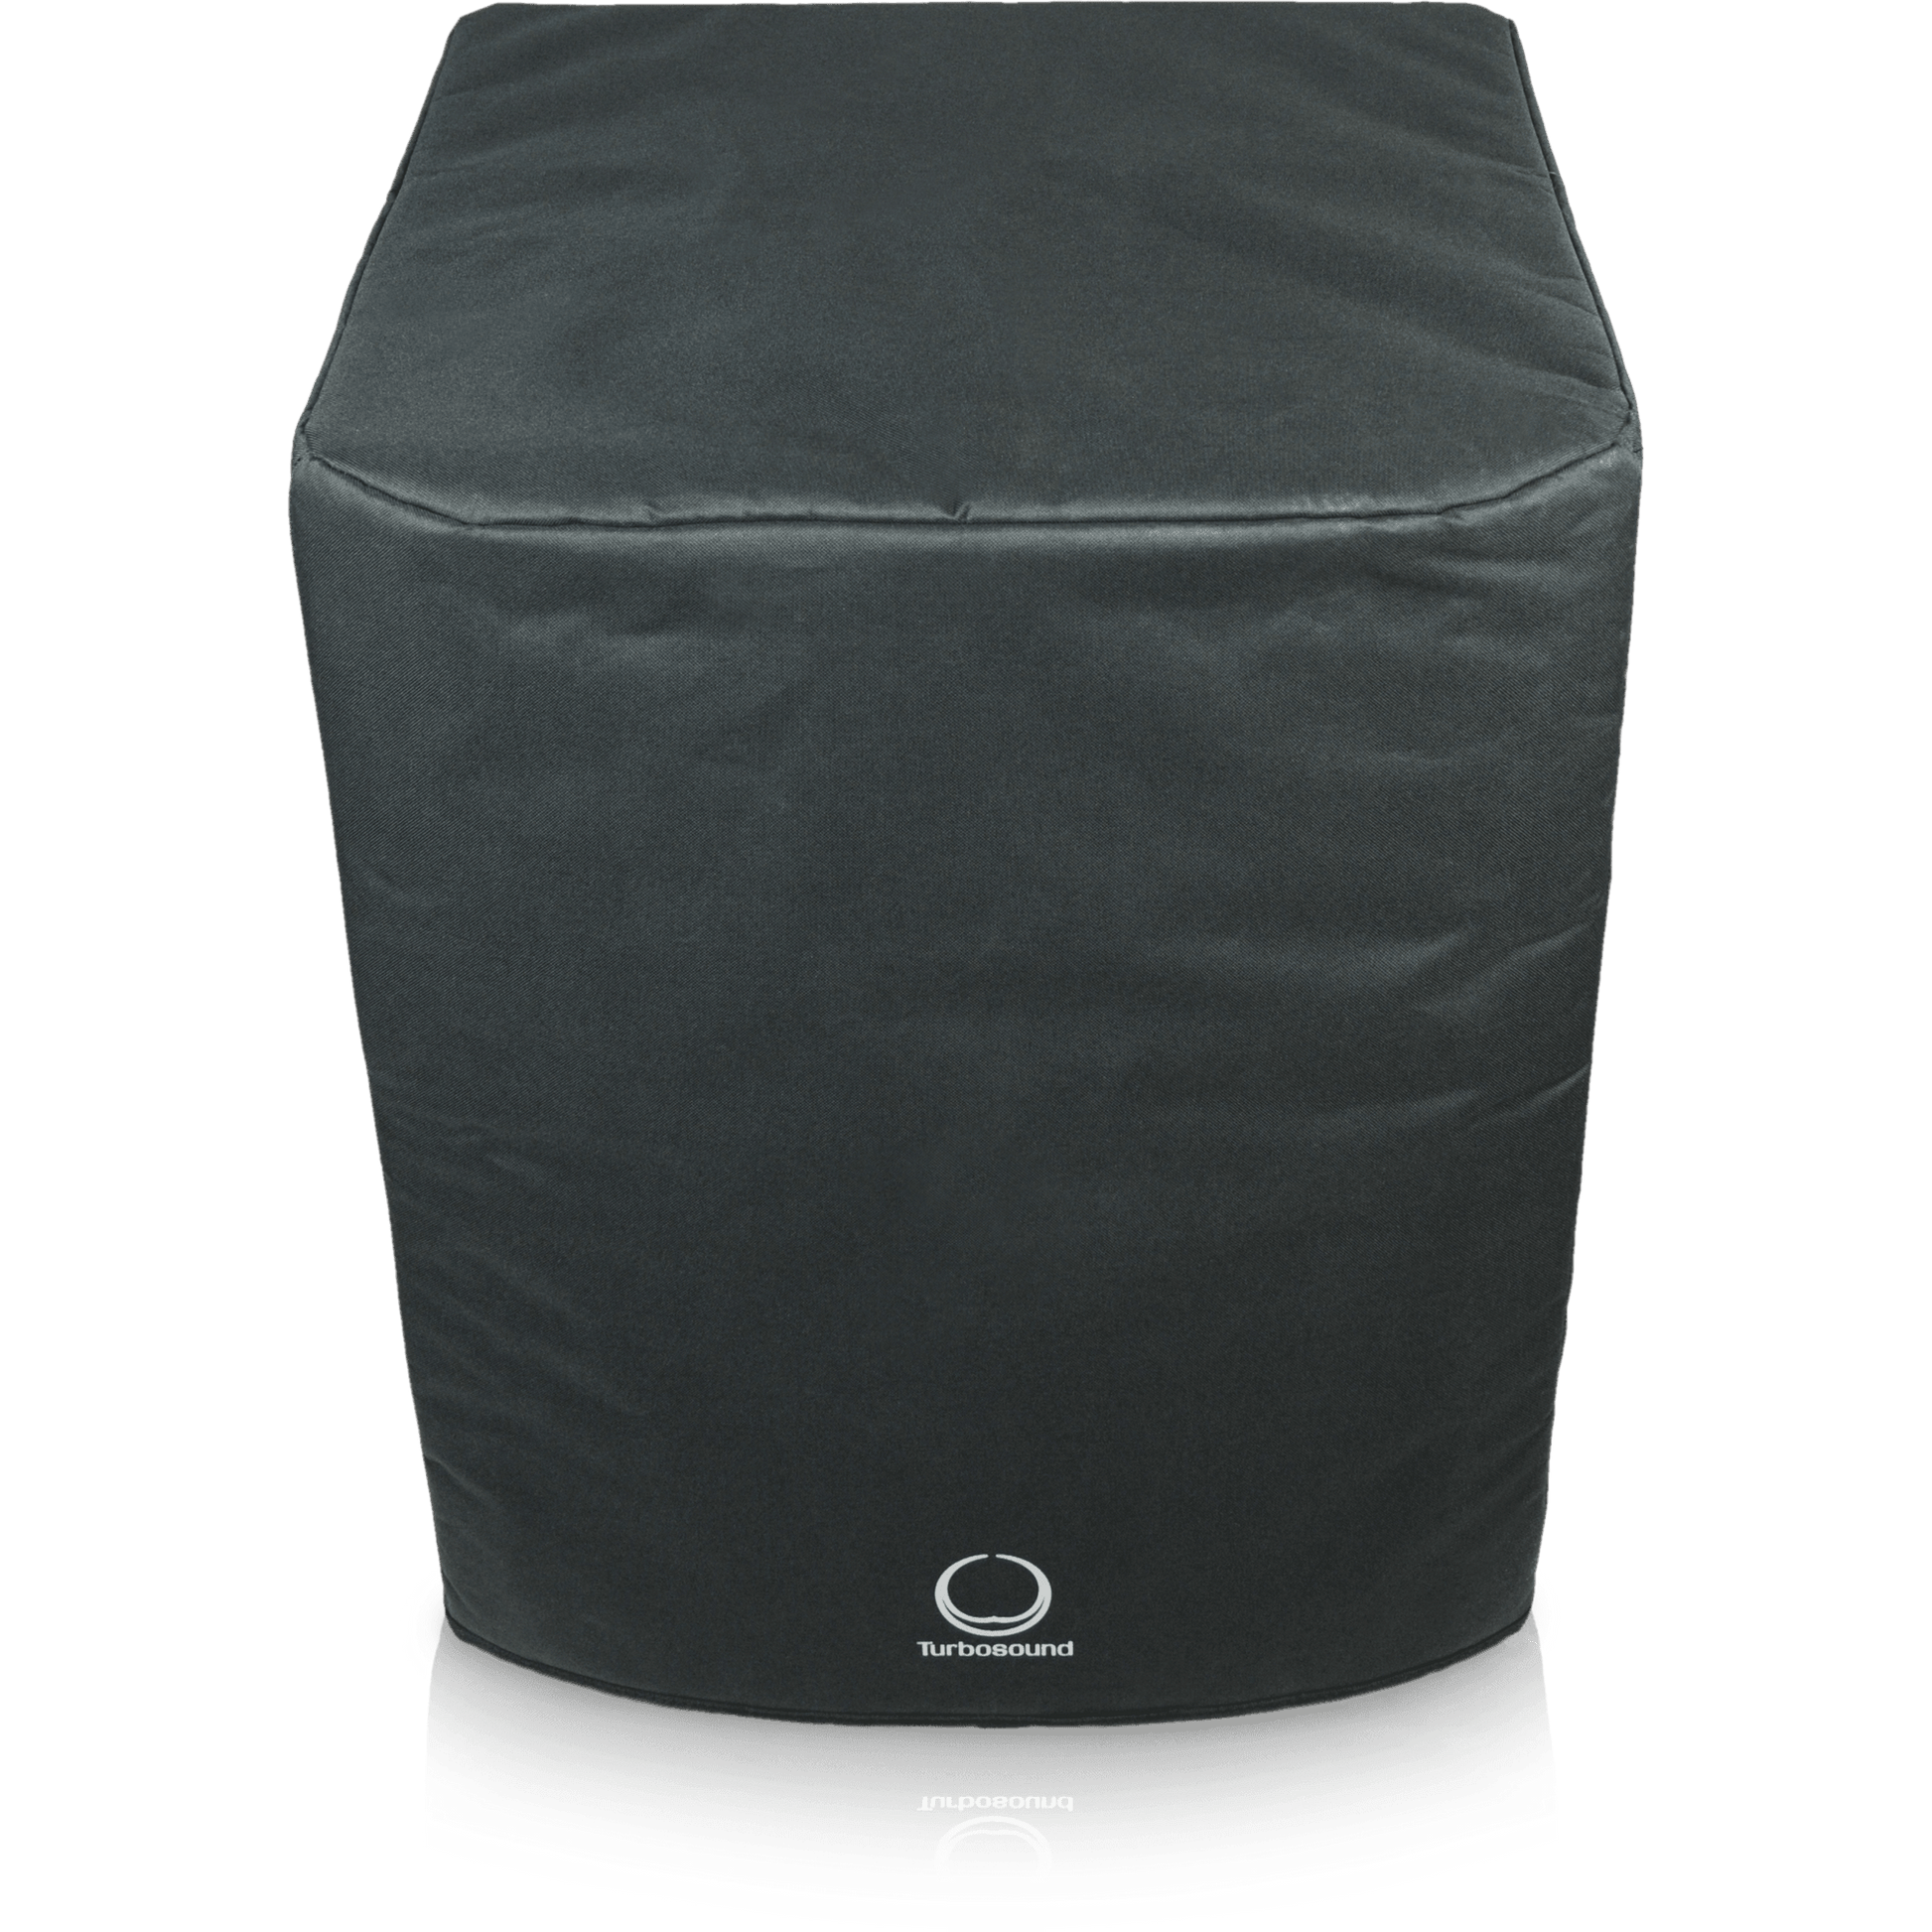 Turbosound TS-PC18B-1 Deluxe Water Resistant Protective Cover for 18" Subwoofers, including iQ18B (Without Castors-Mounted)